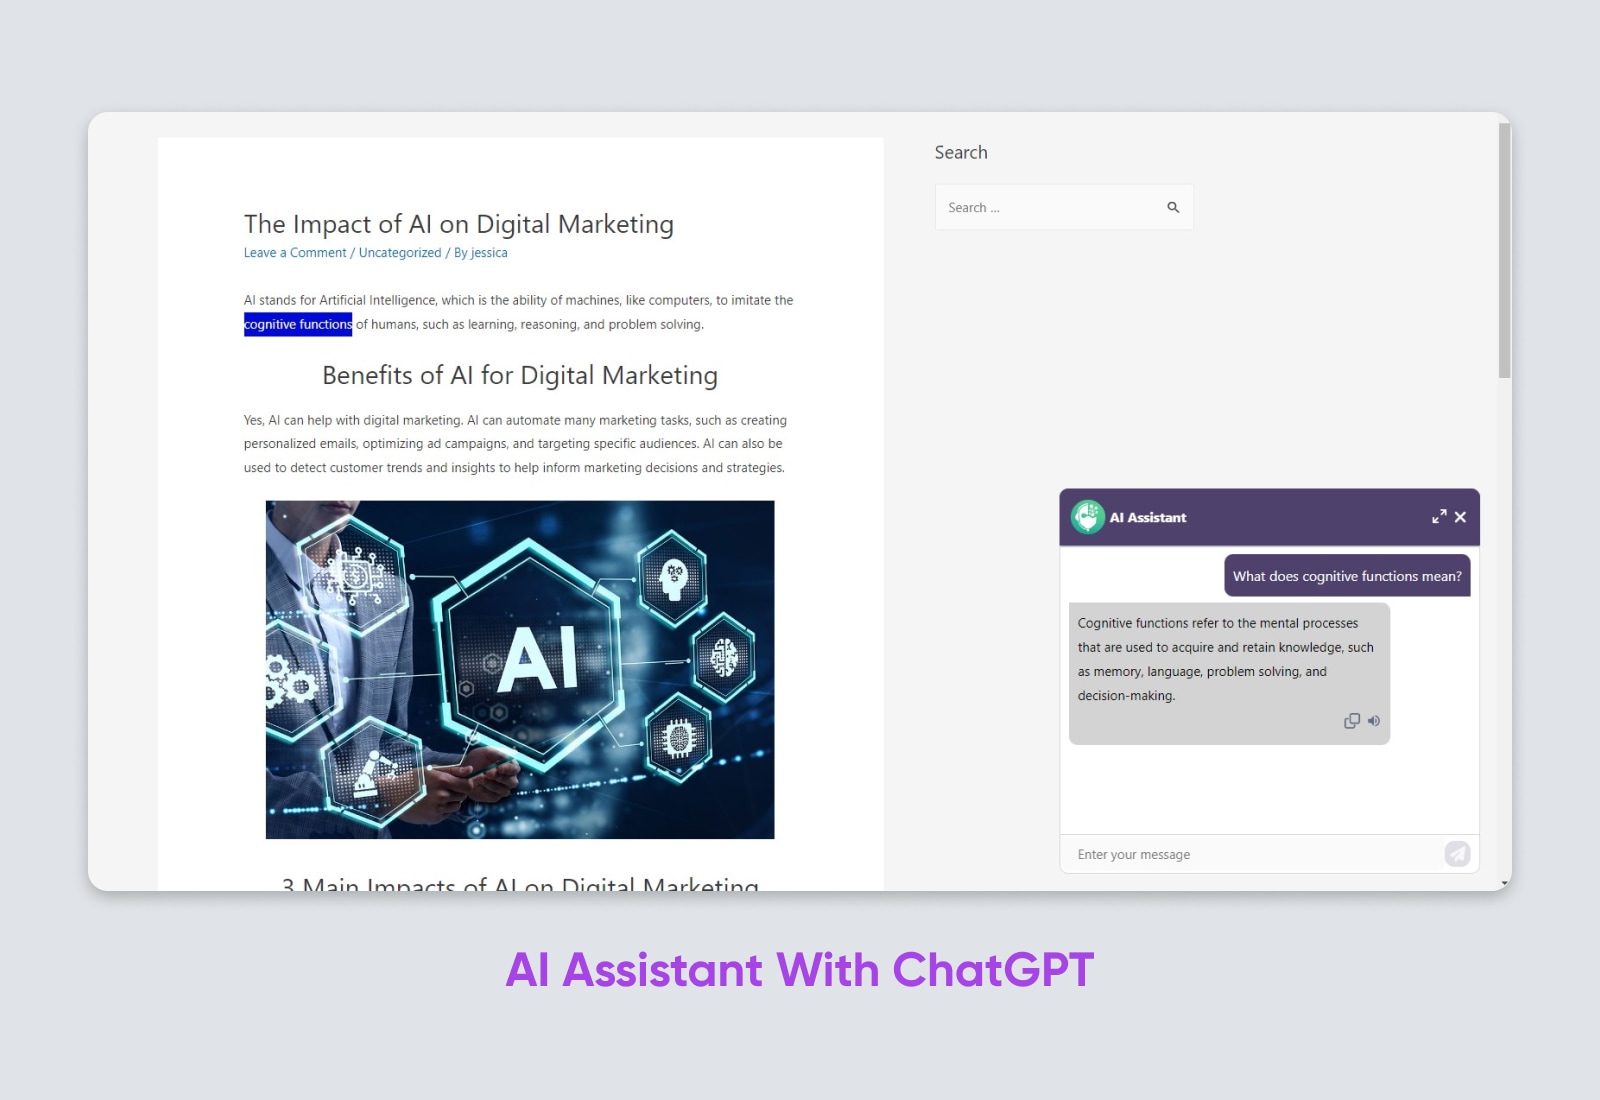 AI Assistant With ChatGPT